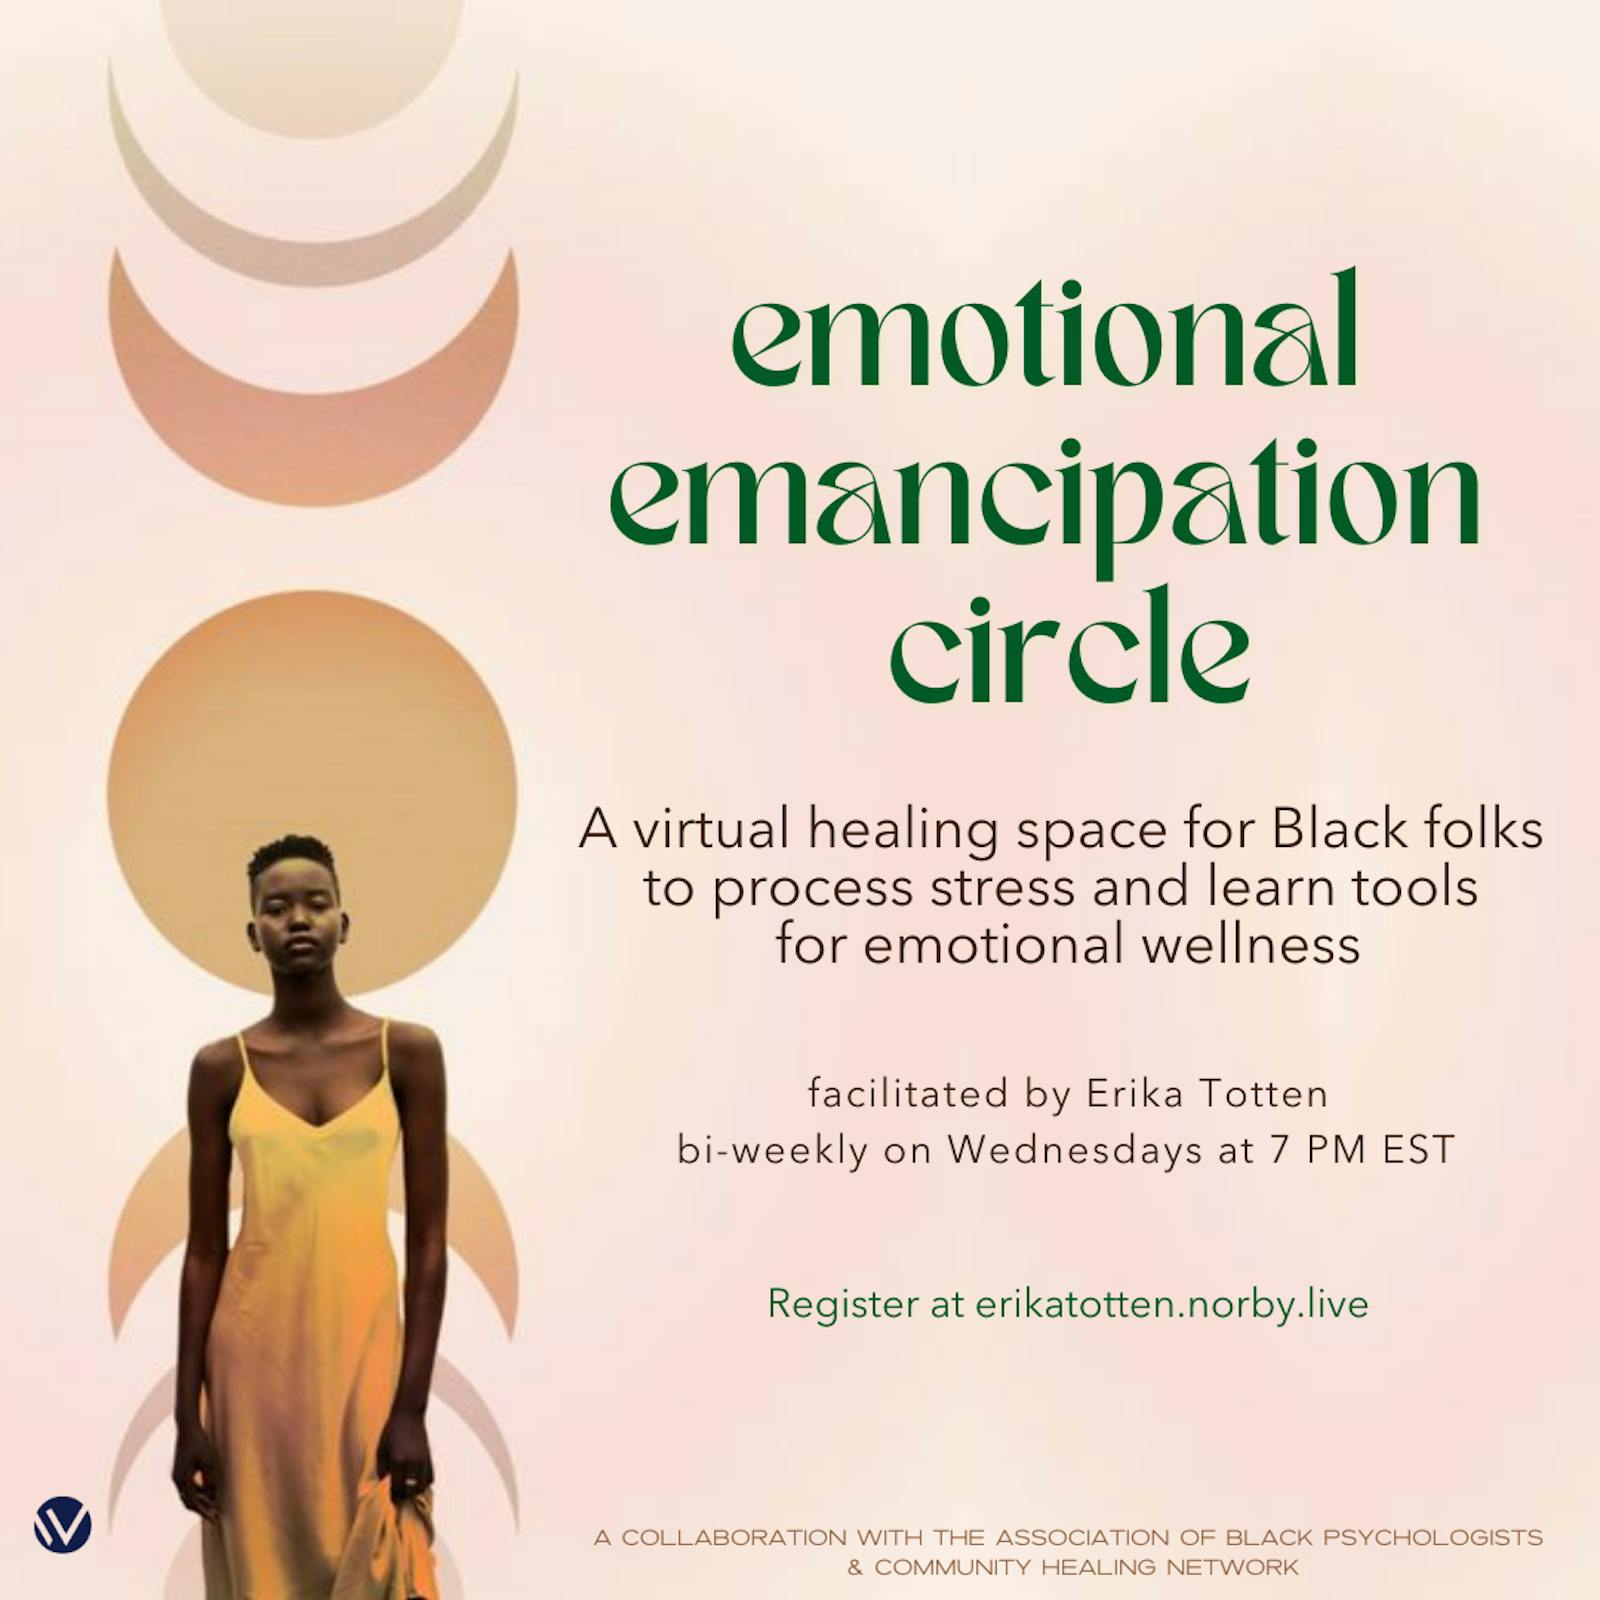 Join Our Emotional Emancipation Circle